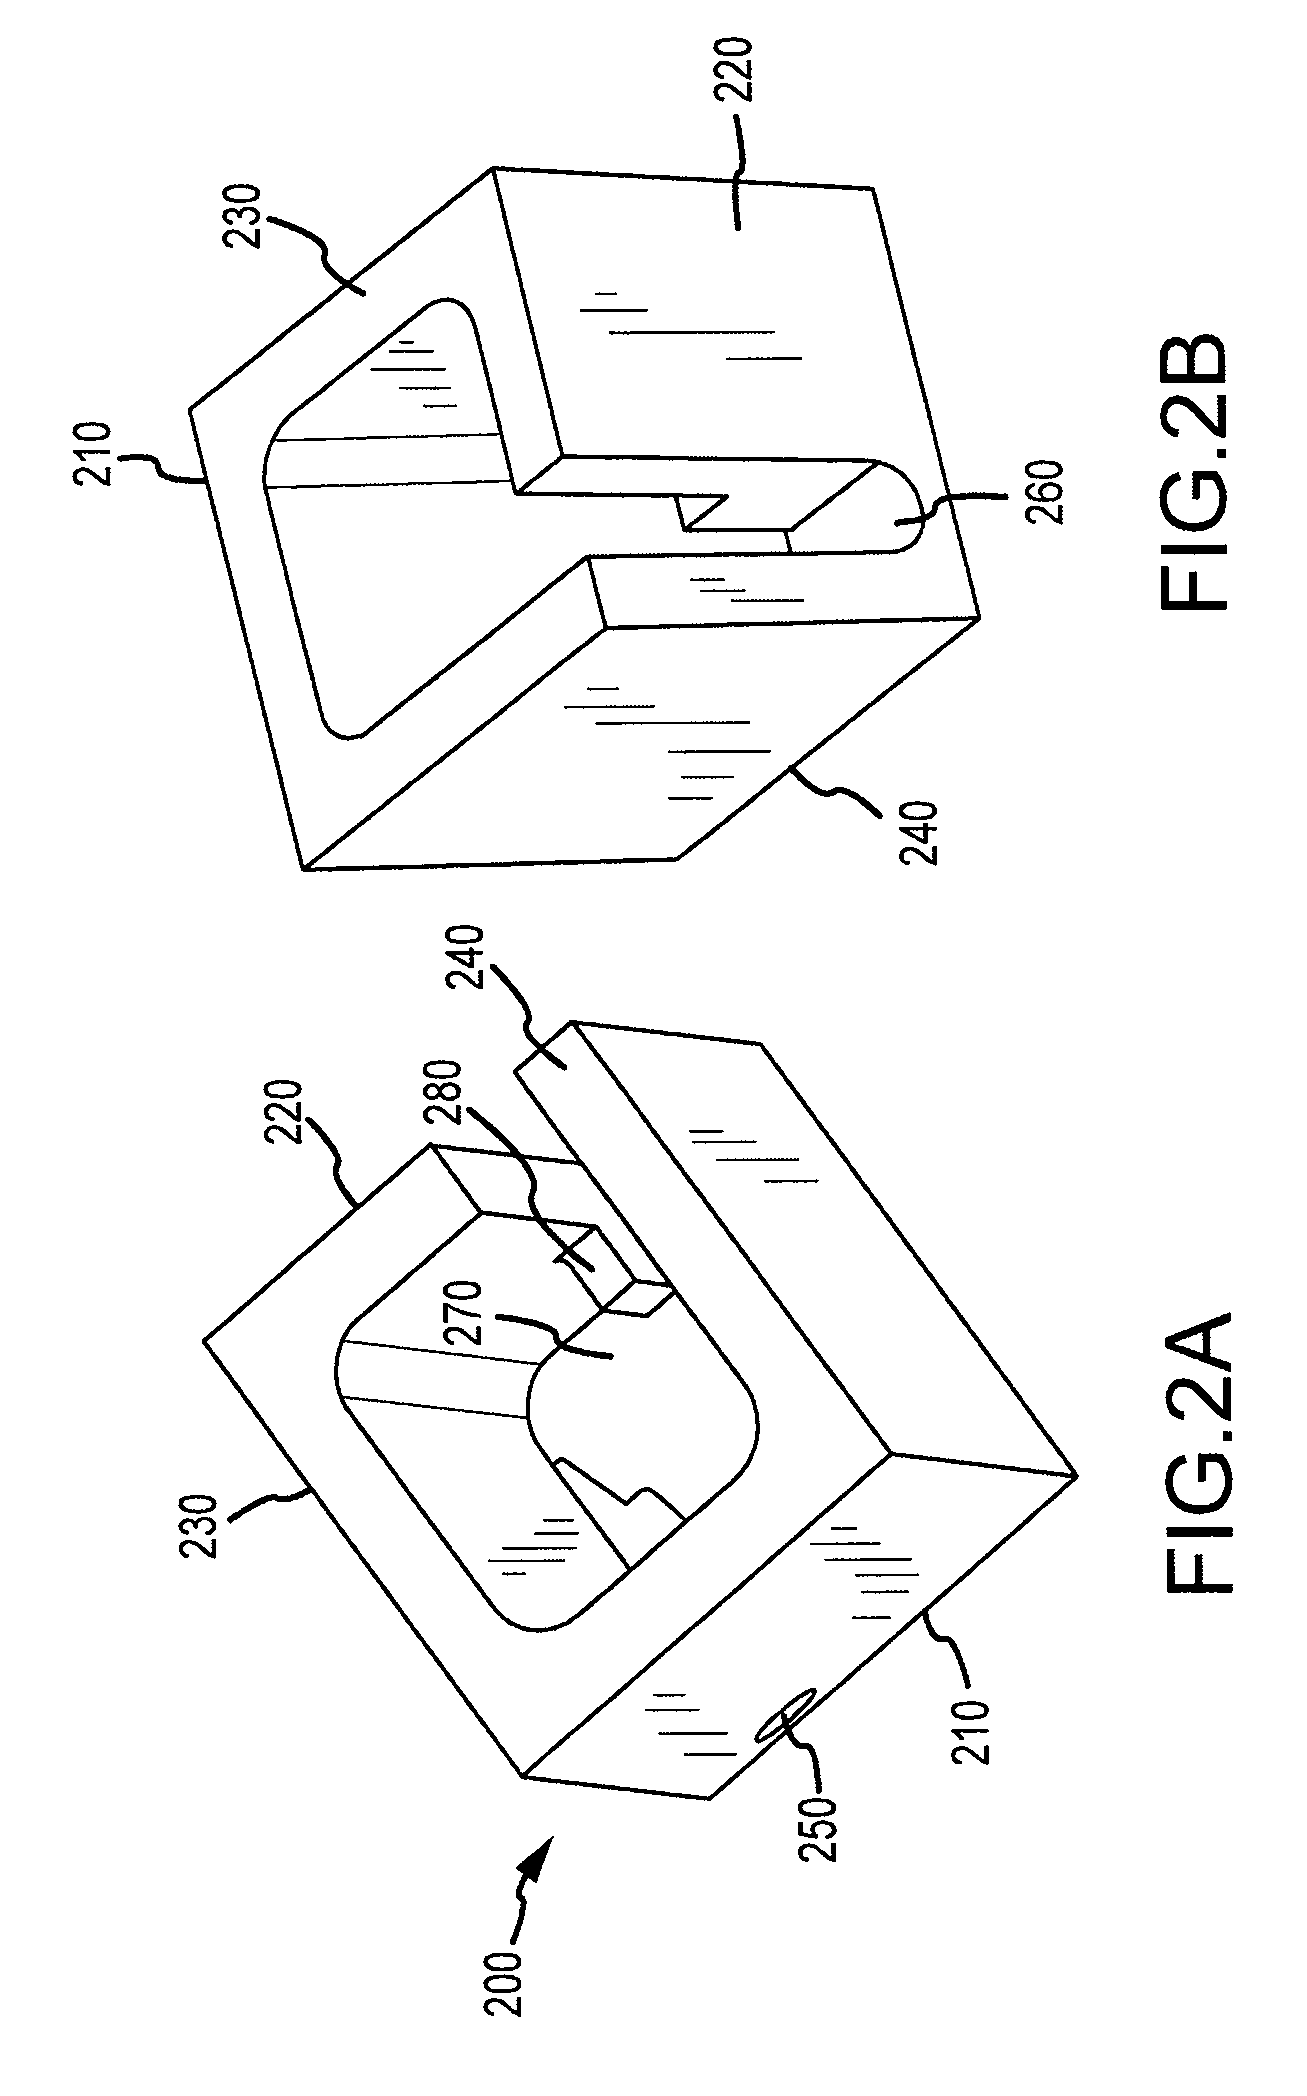 Systems and methods for melting scrap metal